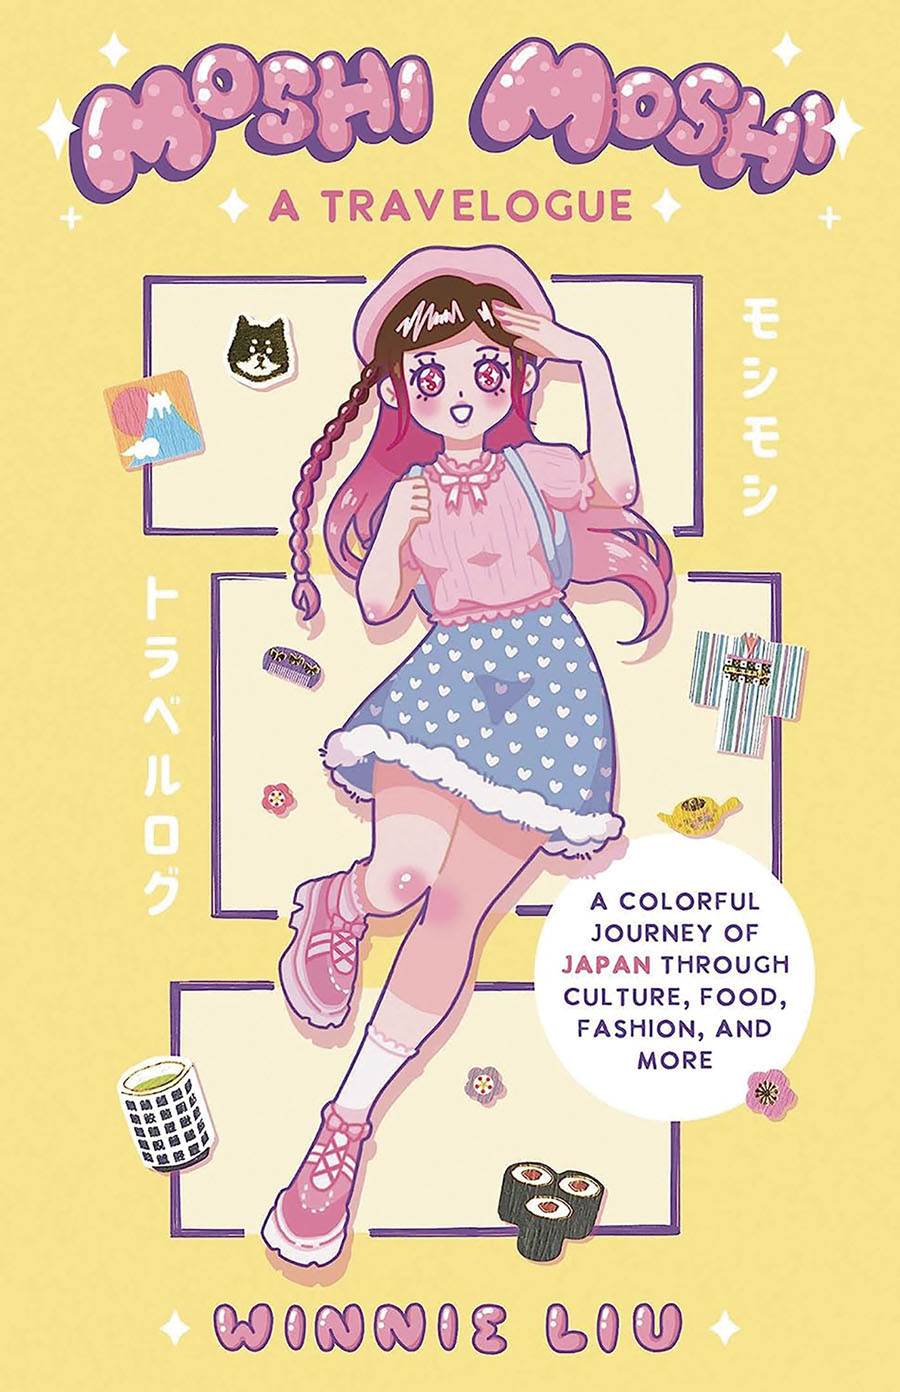 Moshi Moshi A Travelogue A Colorful Journey Of Japan Through Culture Food Fashion And More SC